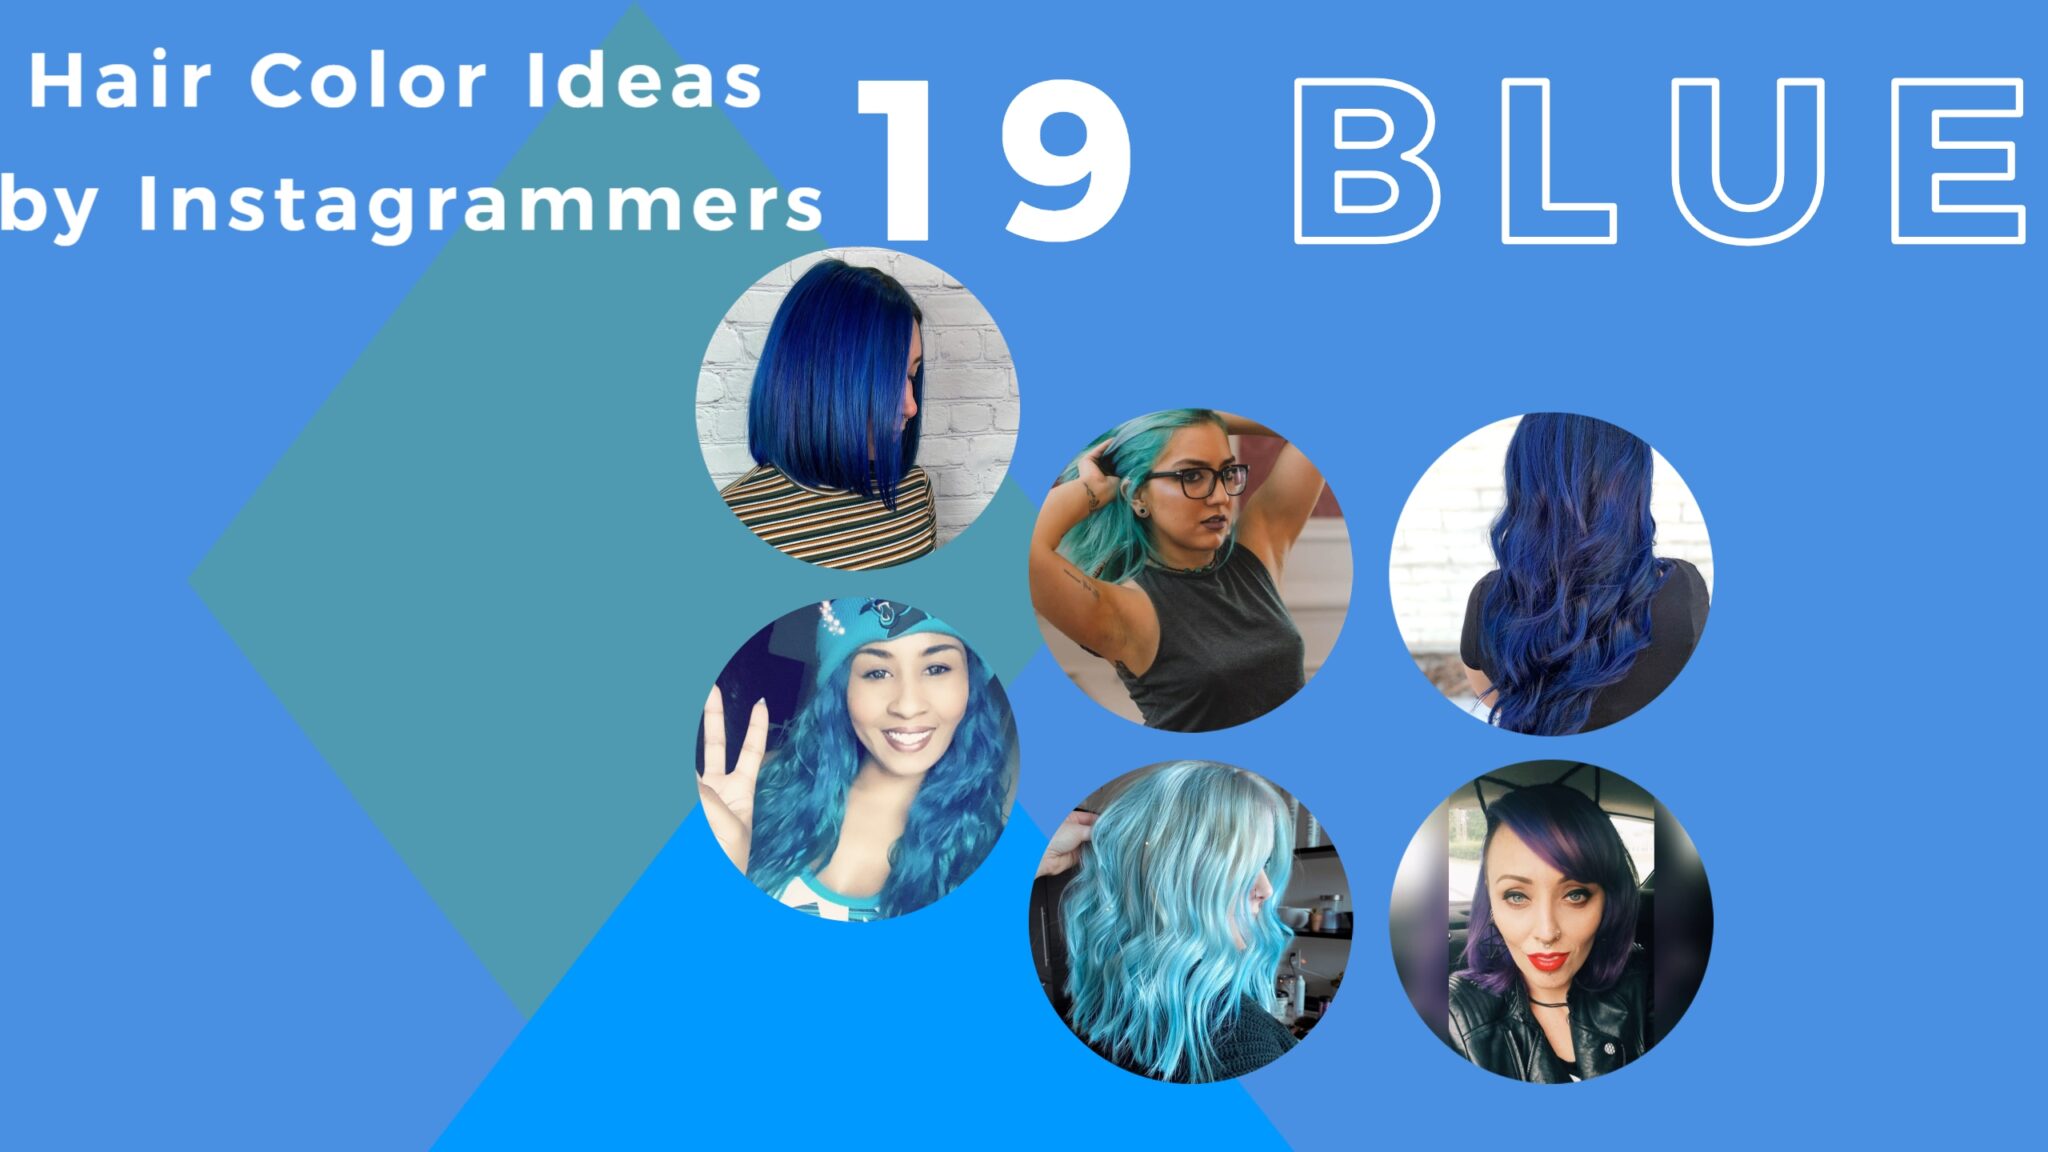 8. "Tips for Choosing the Right Shade of Pink to Blue Hair Color" - wide 3